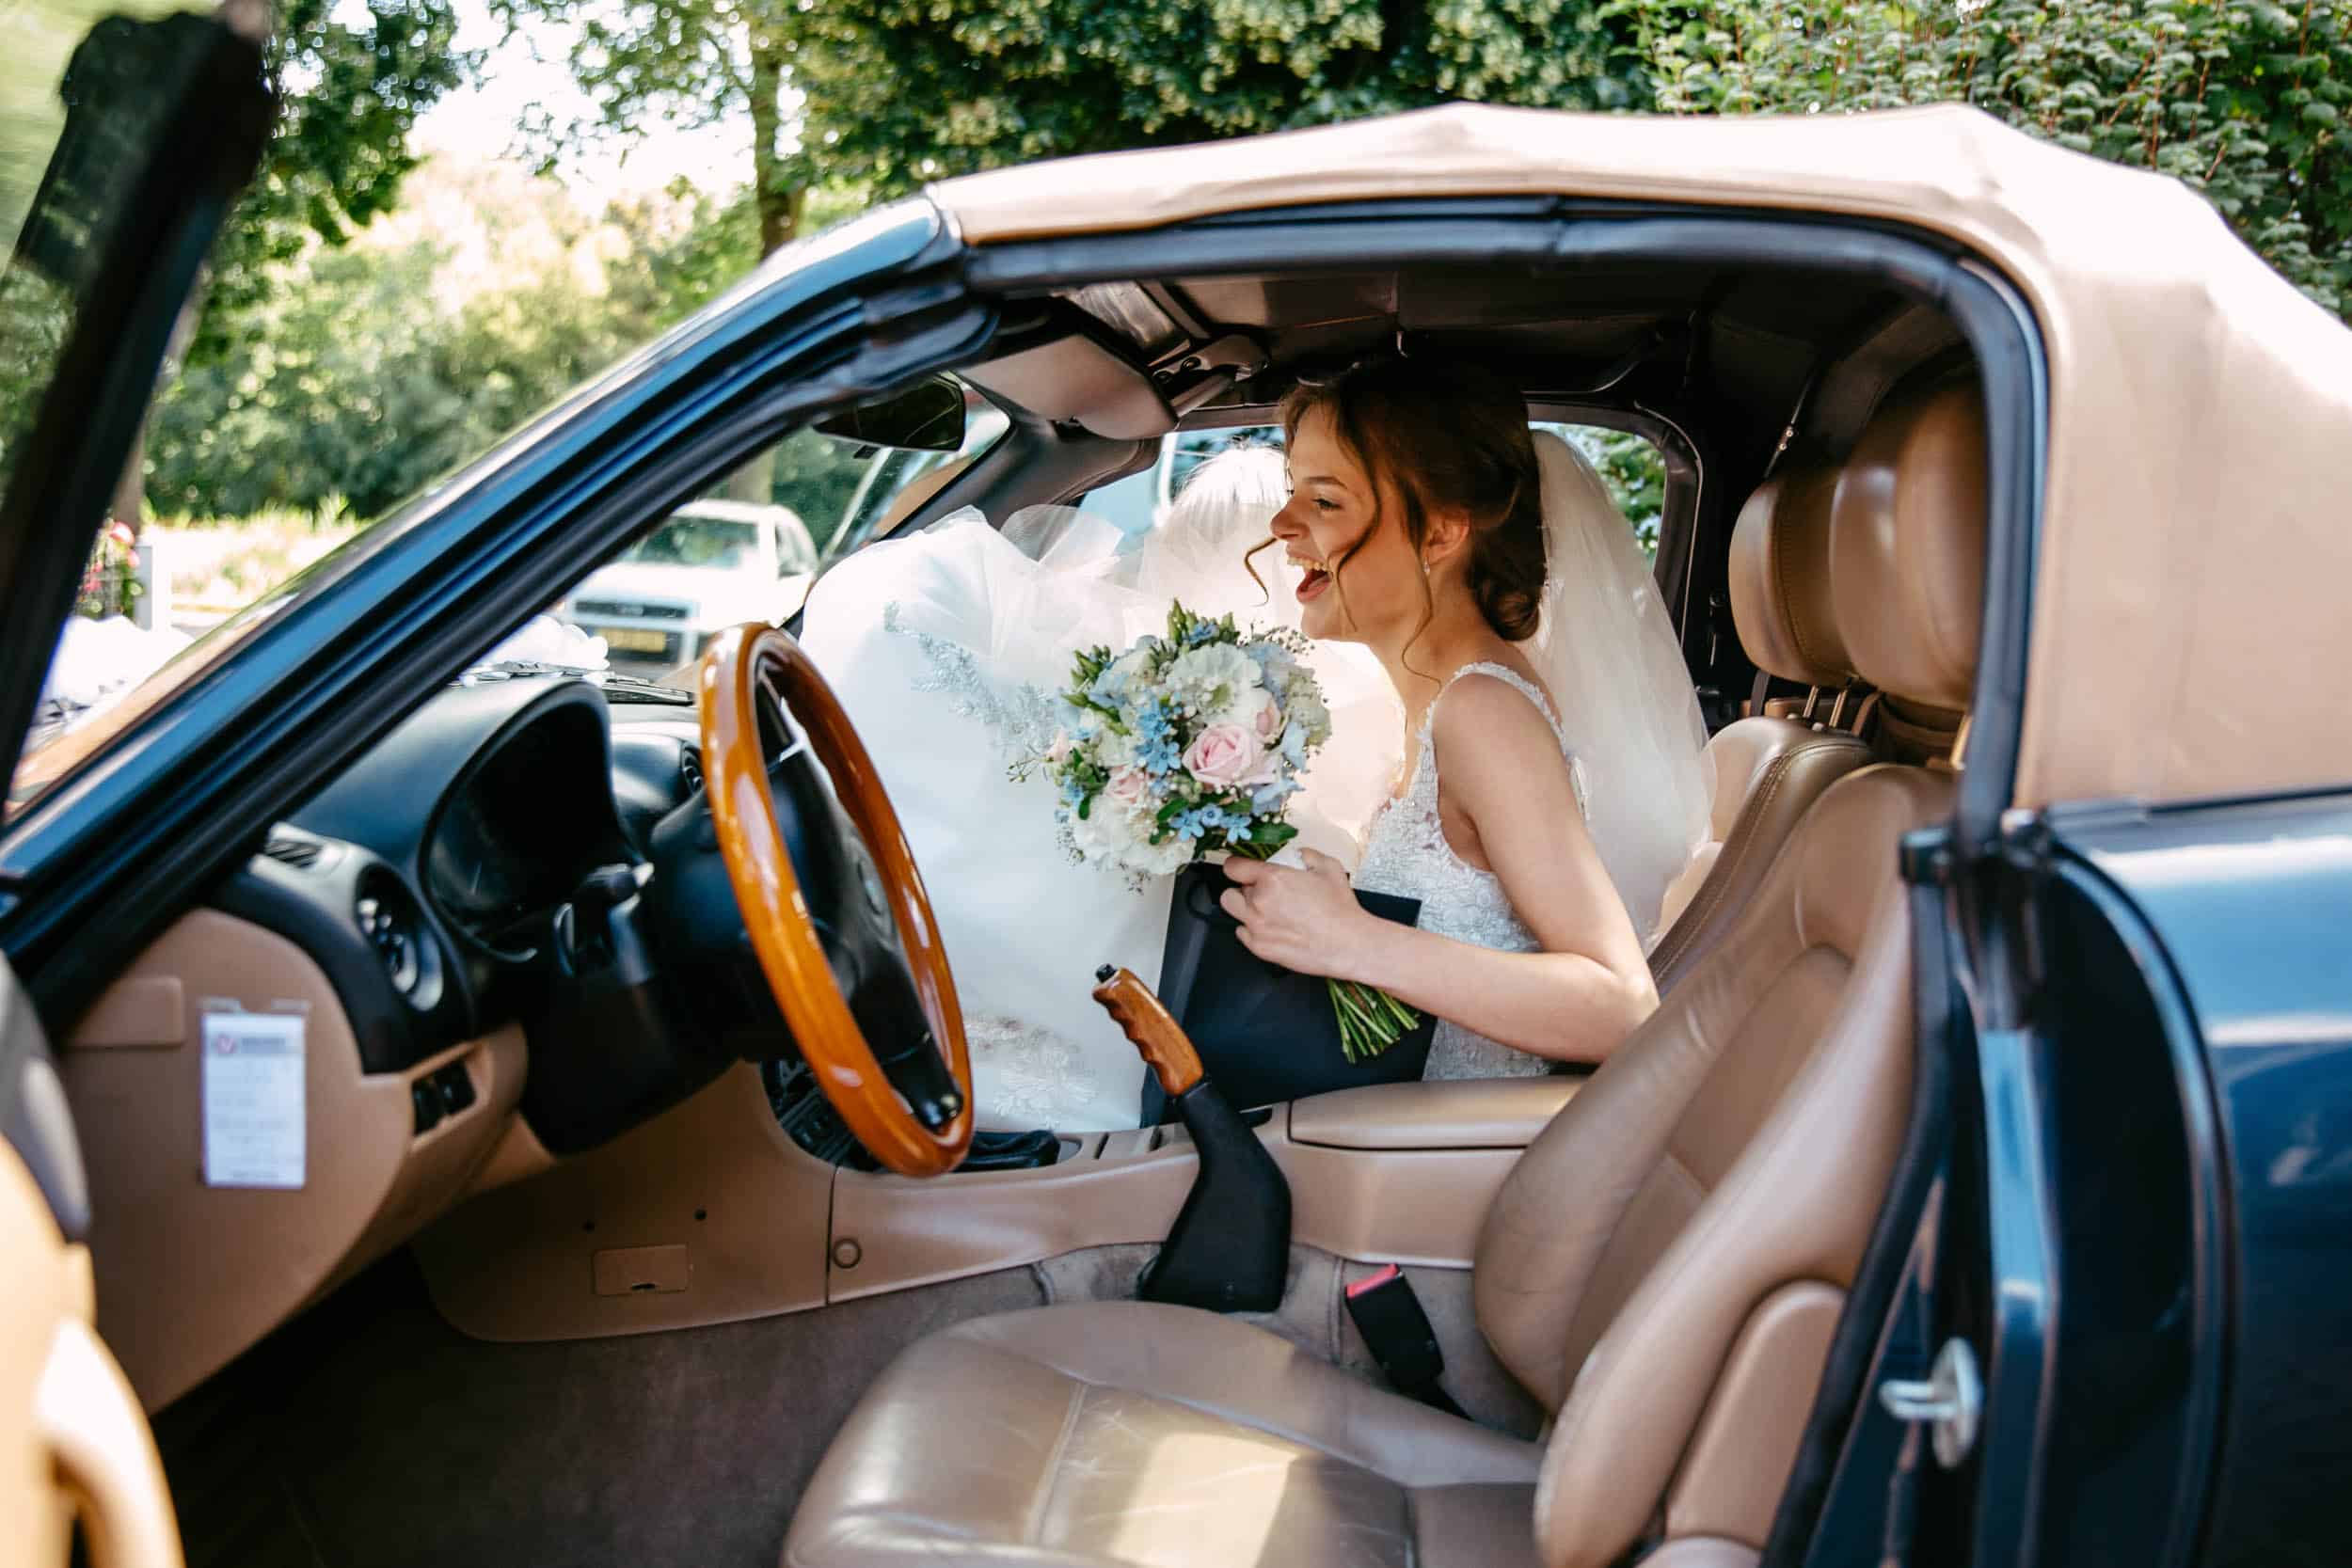 At Trouwerij Botanische Tuin Delft, a bride sits behind the wheel of a car.